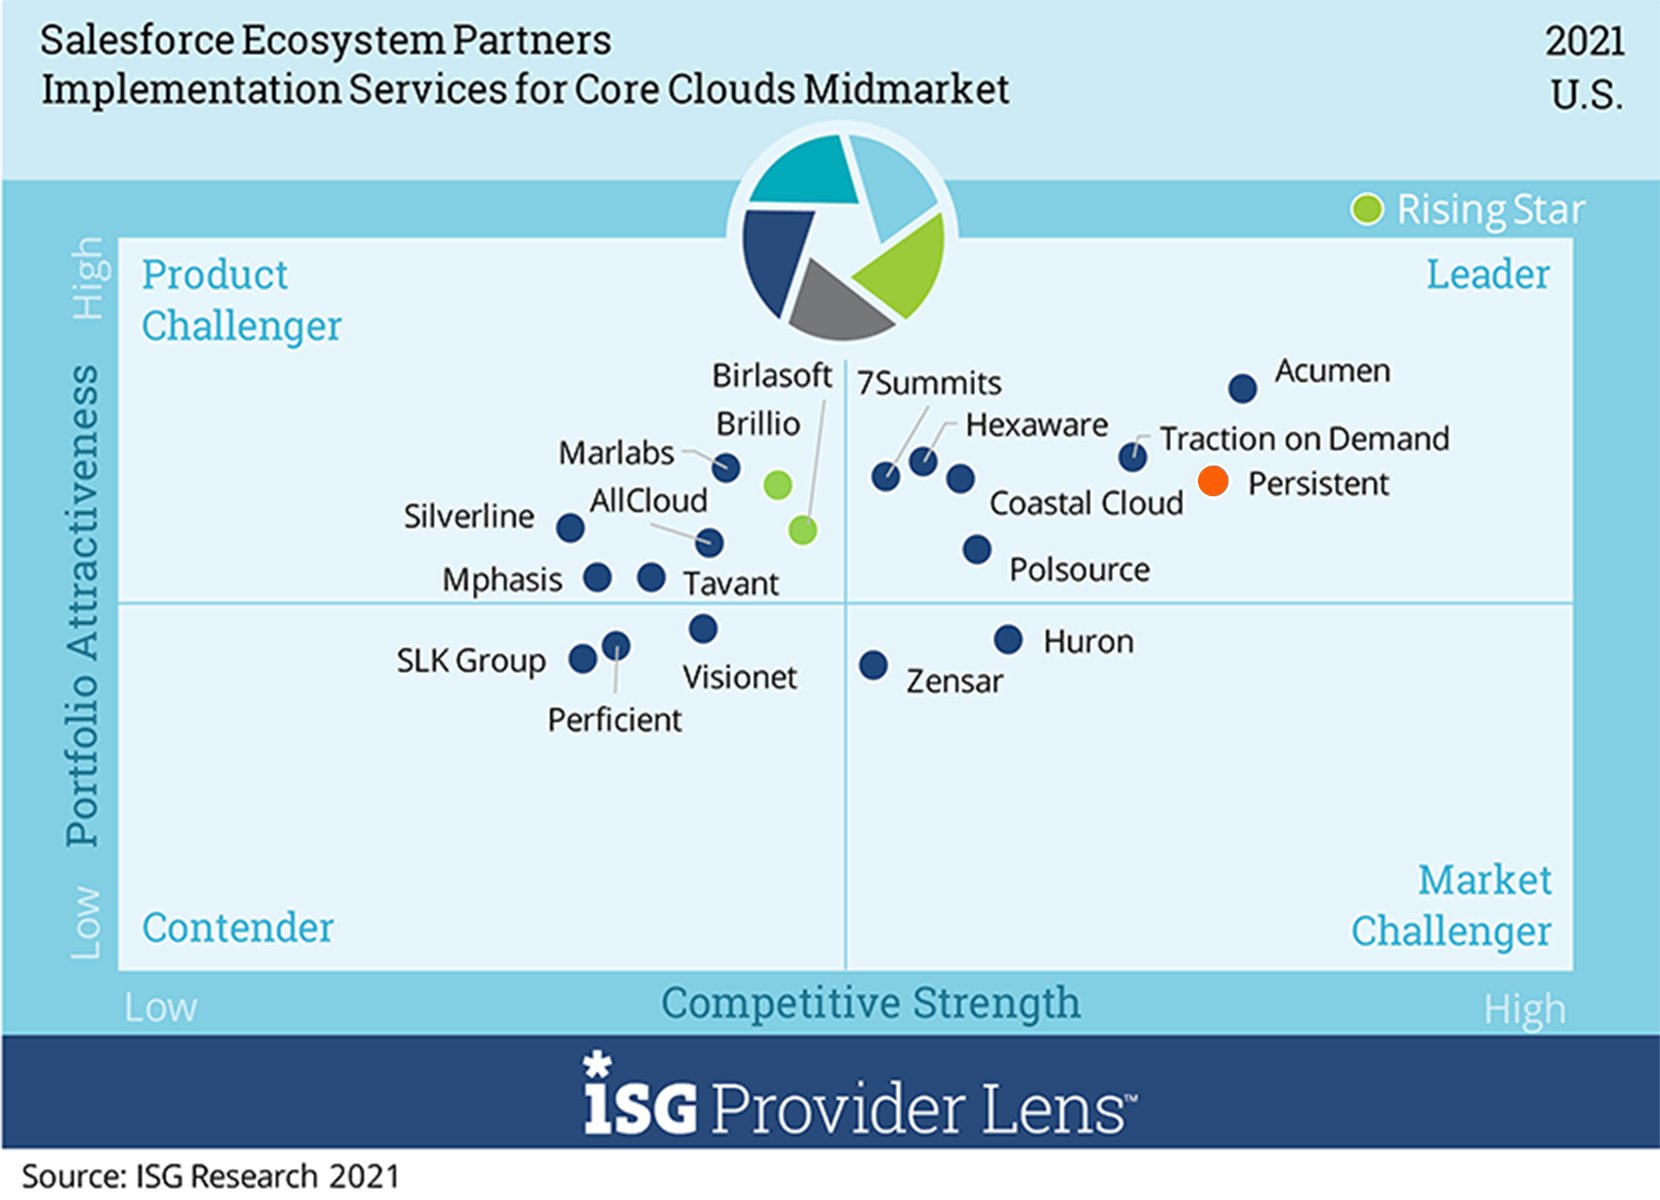 Leader’ in Implementation Services for Core Clouds – Midmarket in U.S. and Germany